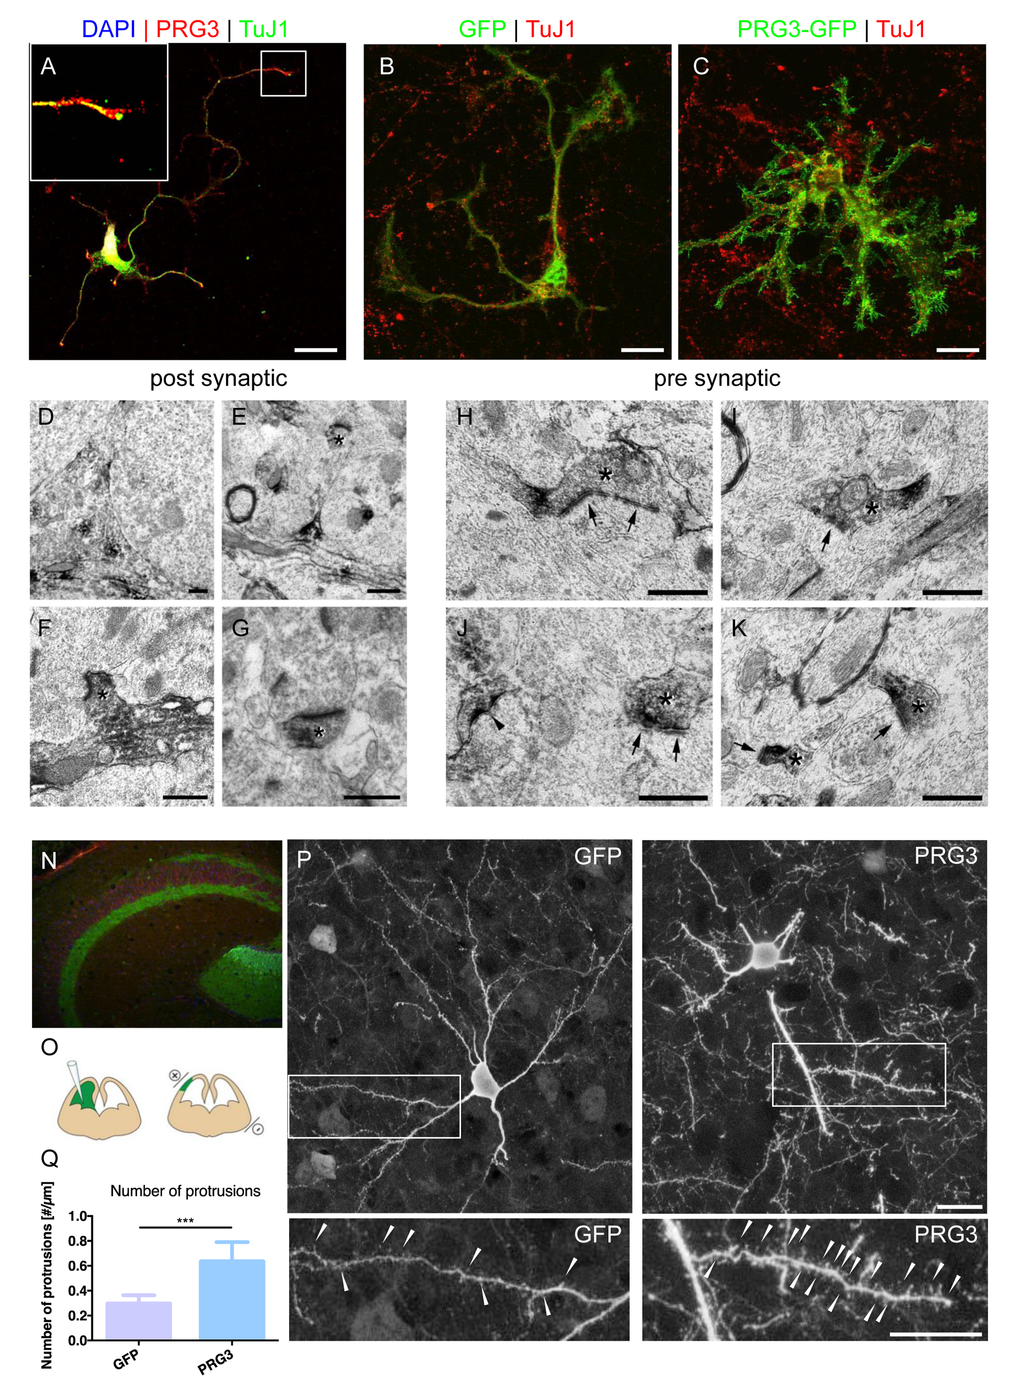 PRG3 is located at pre-synaptic domains in vitro and in vivo. (A) Endogenous PRG3 (red colour) is located at the plasma membrane and accumulated in TuJ1 positive axonal processes (green) in rat cortical neurons. Scale: 20 µm. (B) GFP vector transfection of rat primary cerebellar granular cells does not significantly alter cell morphology. TuJ1 co-staining shows neuronal origin (red). Scale: 20 µm (C) PRG3 overexpression (green) in primary cerebellar granular cells induces and accelerate neuronal outgrowth compared to controls (GFP, green). TuJ1immunostaining is given in red. Scale: 20 µm. (D-G) Pre-embedding electron microscopy immunolocalization of PRG3. Subcellular analysis reveals post-synaptic distribution of PRG3. DAB accumulated in the cytoplasm (D). Dendritic spine structures were also found positive for PRG3 and are indicated by asterisks (E-G). Scales: 0.5 µm. (H-K) Occasionally, axonal boutons (pre-synaptic structures), appeared labeled with PRG3 antibodies (asterisk). Accumulations of DAB appeared especially in the pre-terminal parts of the axonal boutons. Postsynaptic elements are marked with arrows and a labeled spine with an arrowhead in J. Scales: 0.5 µm. (N) Immunohistochemical staining identifies endogenous PRG3 expression (green) is located primarily in the hippocampus in the adult mouse brain (Red = TuJ1). (O) Scheme of the experimental protocol for cortical in utero electroporation [55]. (P) Representative example of electroporated brain section showing pyramidal neurons positive for GFP expressing pyramidal neurons (left) and PRG3-positive pyramidal cells (right). Neuronal morphology was analysed at postnatal day 10 (P10). Scale bar represents 20 µm. High-power magnifications of boxed areas show spines and spine-like membrane protrusions, which are indicated by arrowheads. Scale bar represents 20 µm. (Q) Number of protrusions per µm dendrite were quantified in 70 µm confocal stacks. Neurons electoroporated with PRG3 show significantly more protrusions per µm compared to GFP electroporated neurons. Values are given as mean ± SEM. (N=5). Statistical analysis was performed using two tailed student’s t-test. P value was set as * = p